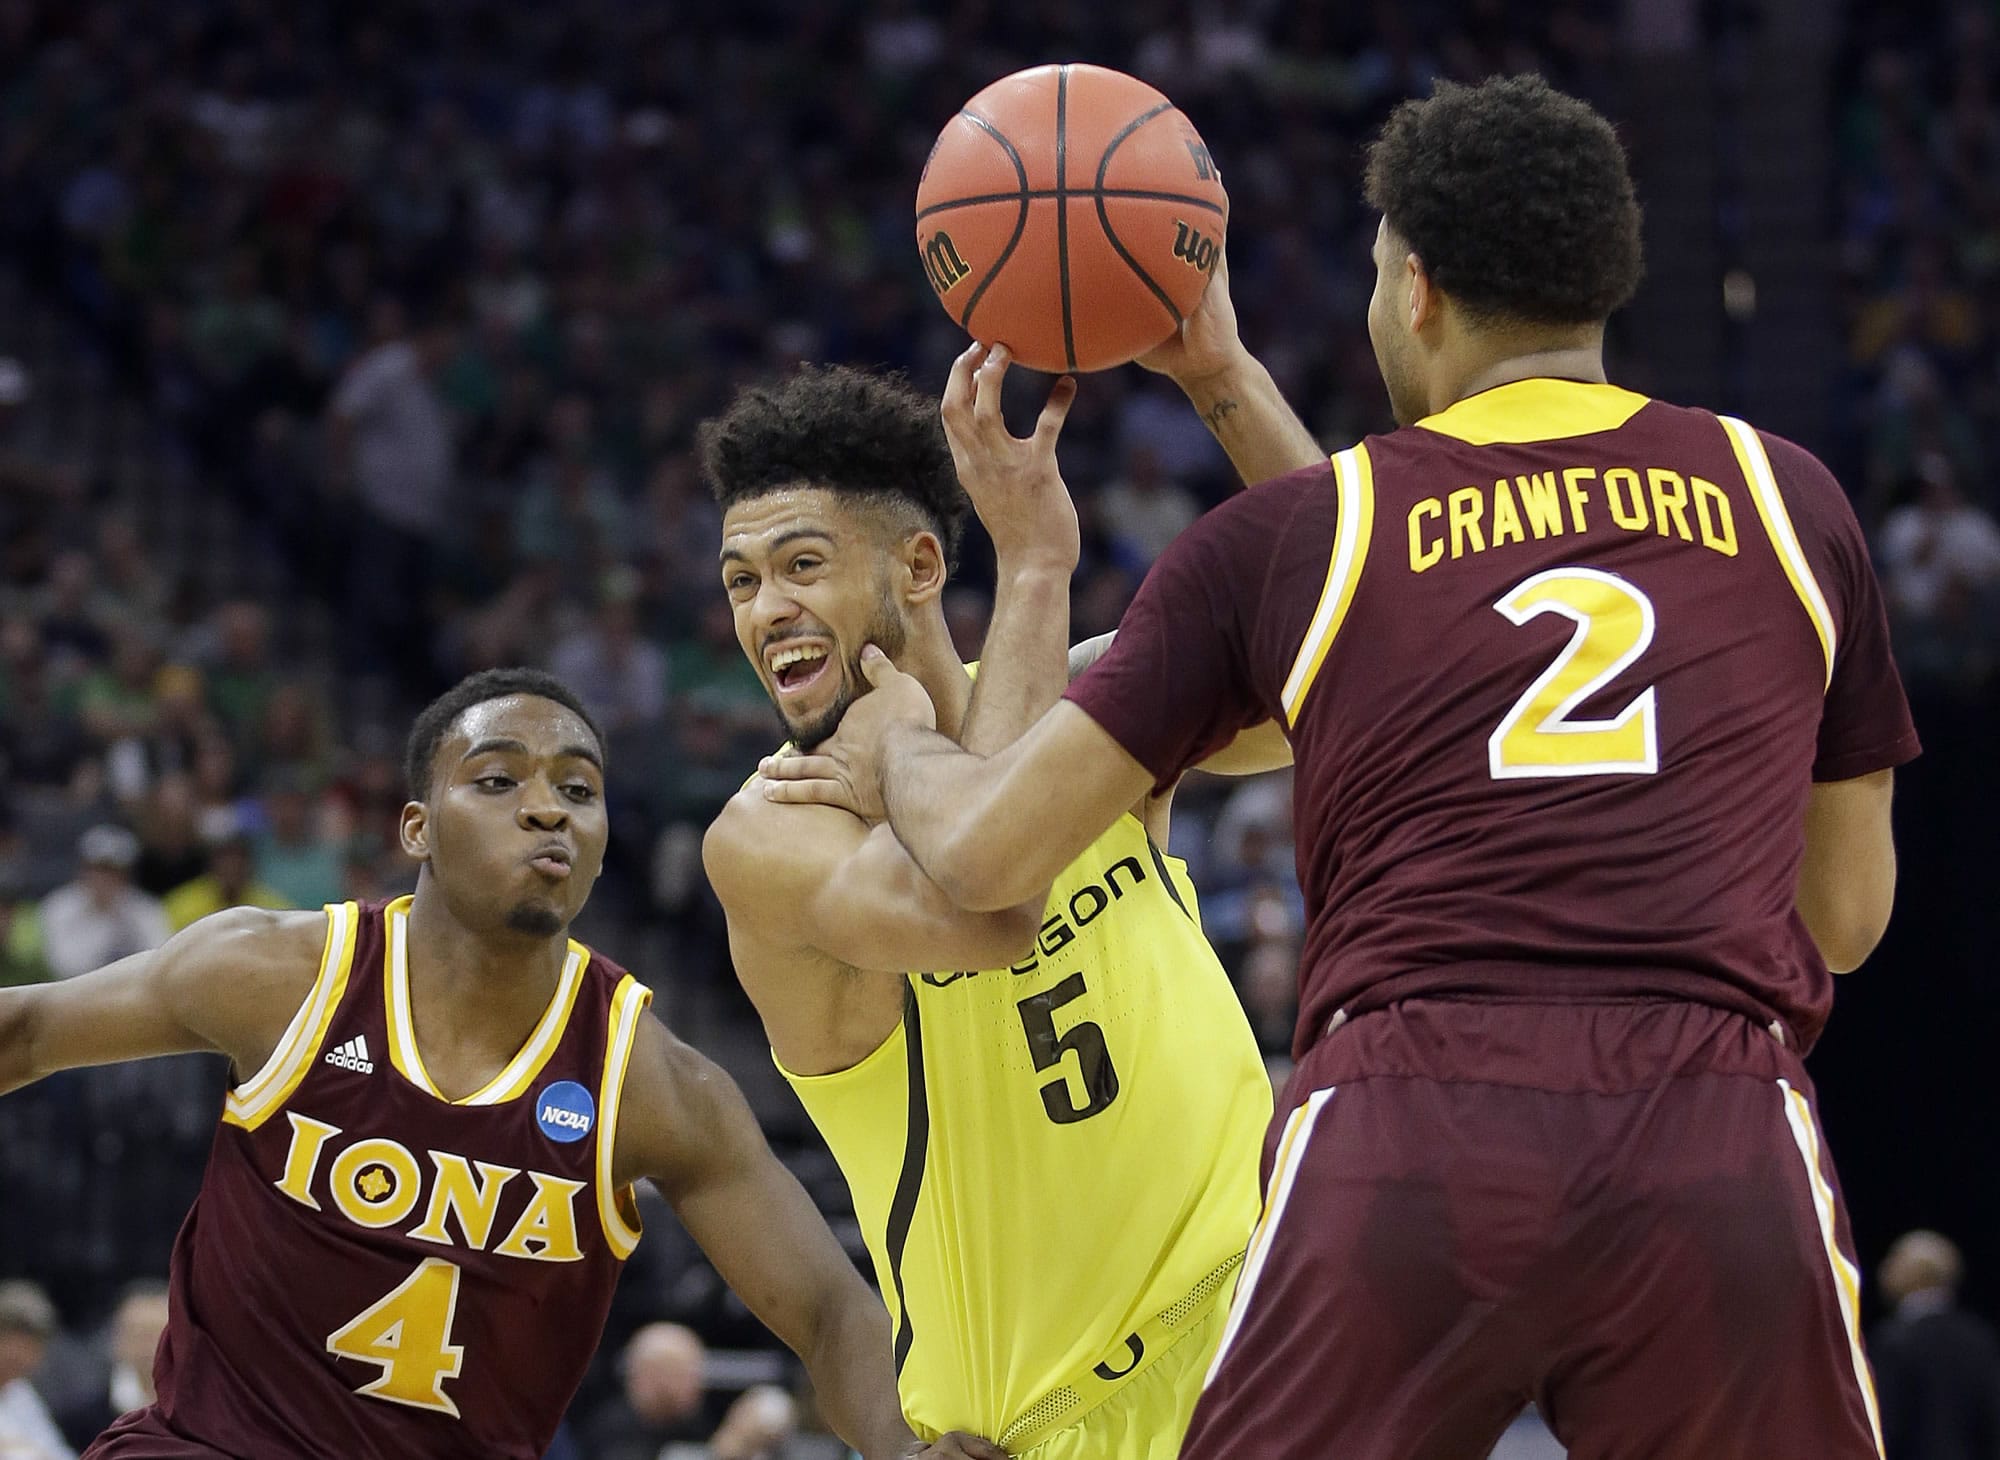 Oregon's Tyler Dorsey, center, drives between Iona's Schadrac Casimir, left, and E.J. Crawford, during the first half of a first-round game in the men's NCAA college basketball tournament Sacramento, Calif. Friday, March 17, 2017.